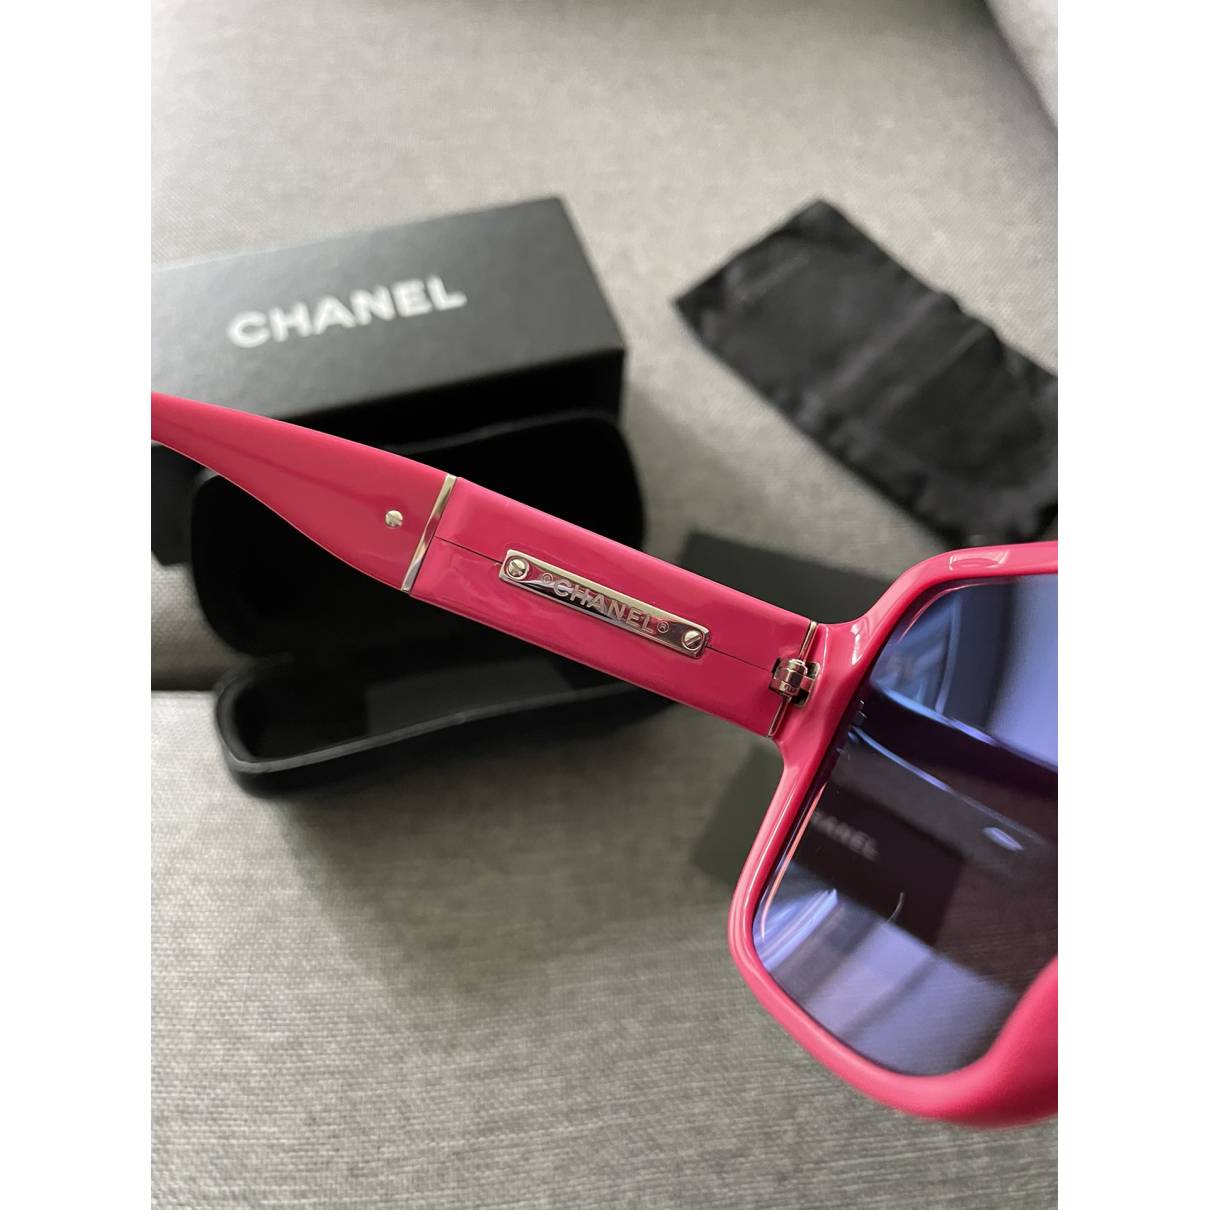 Chanel Pink Oval Sunglasses Chanel